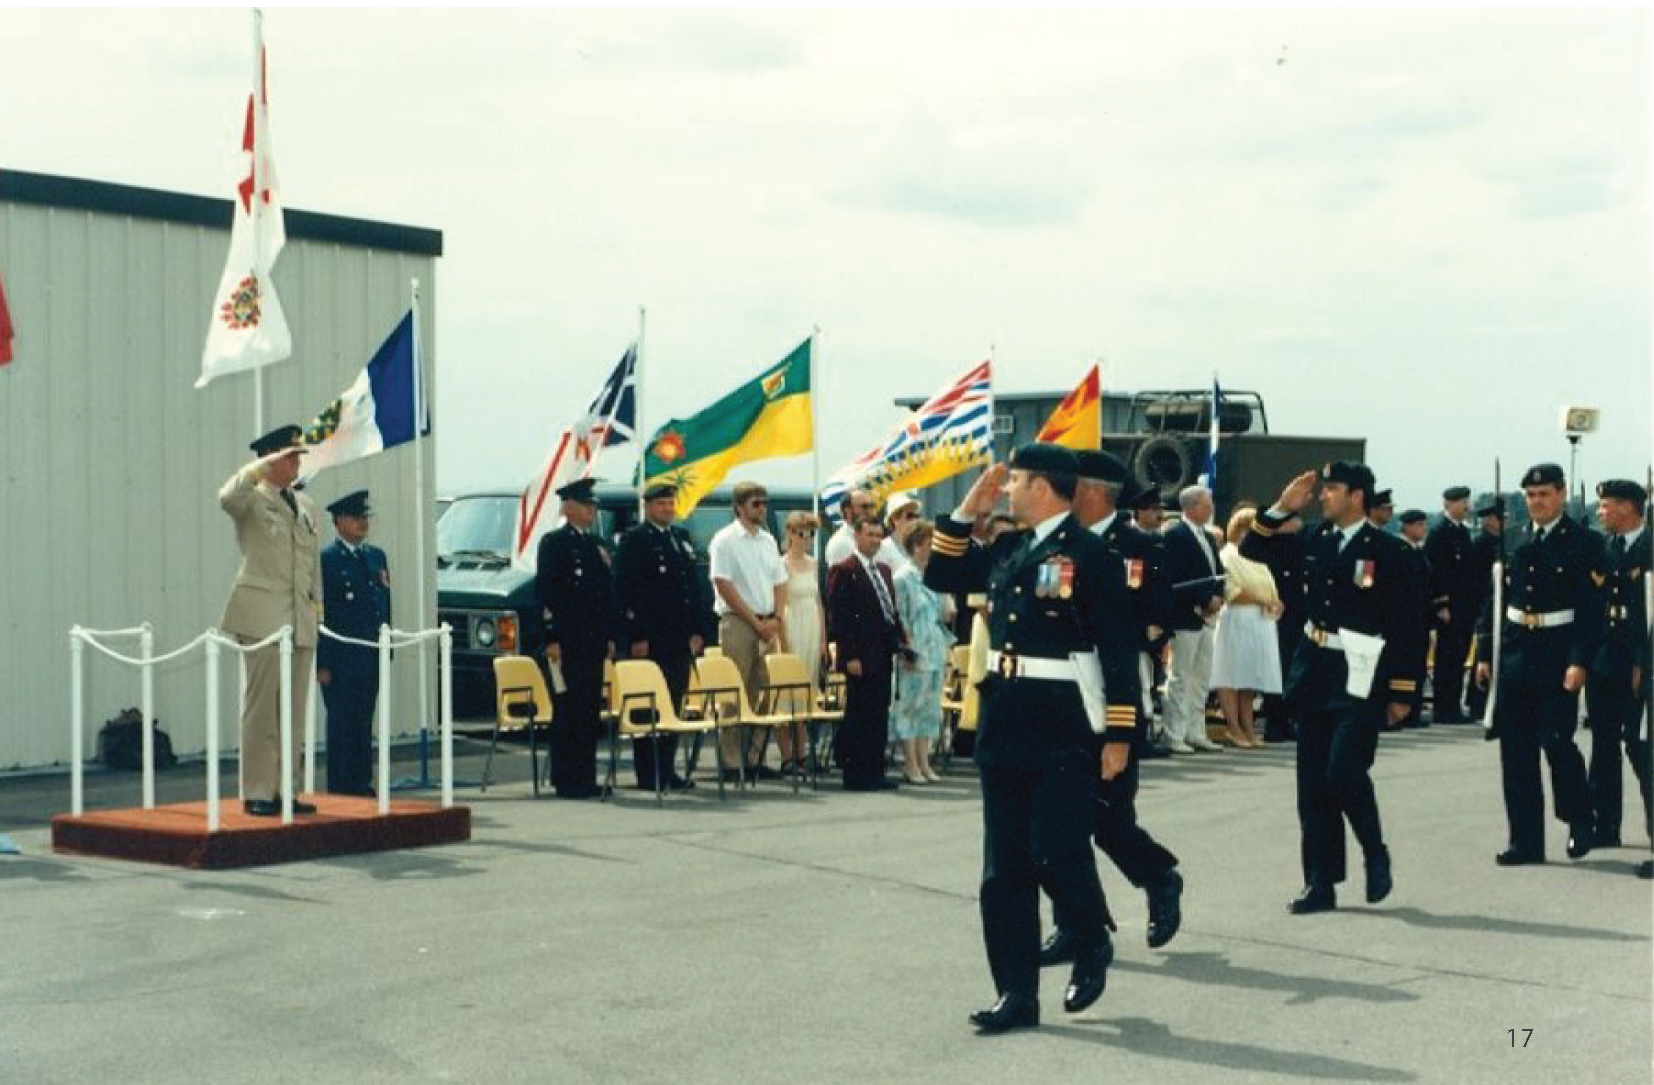 Photo from the Diefenbunker's 2018 Annual Report of members from CFS Carp walking outside while saluting each other.